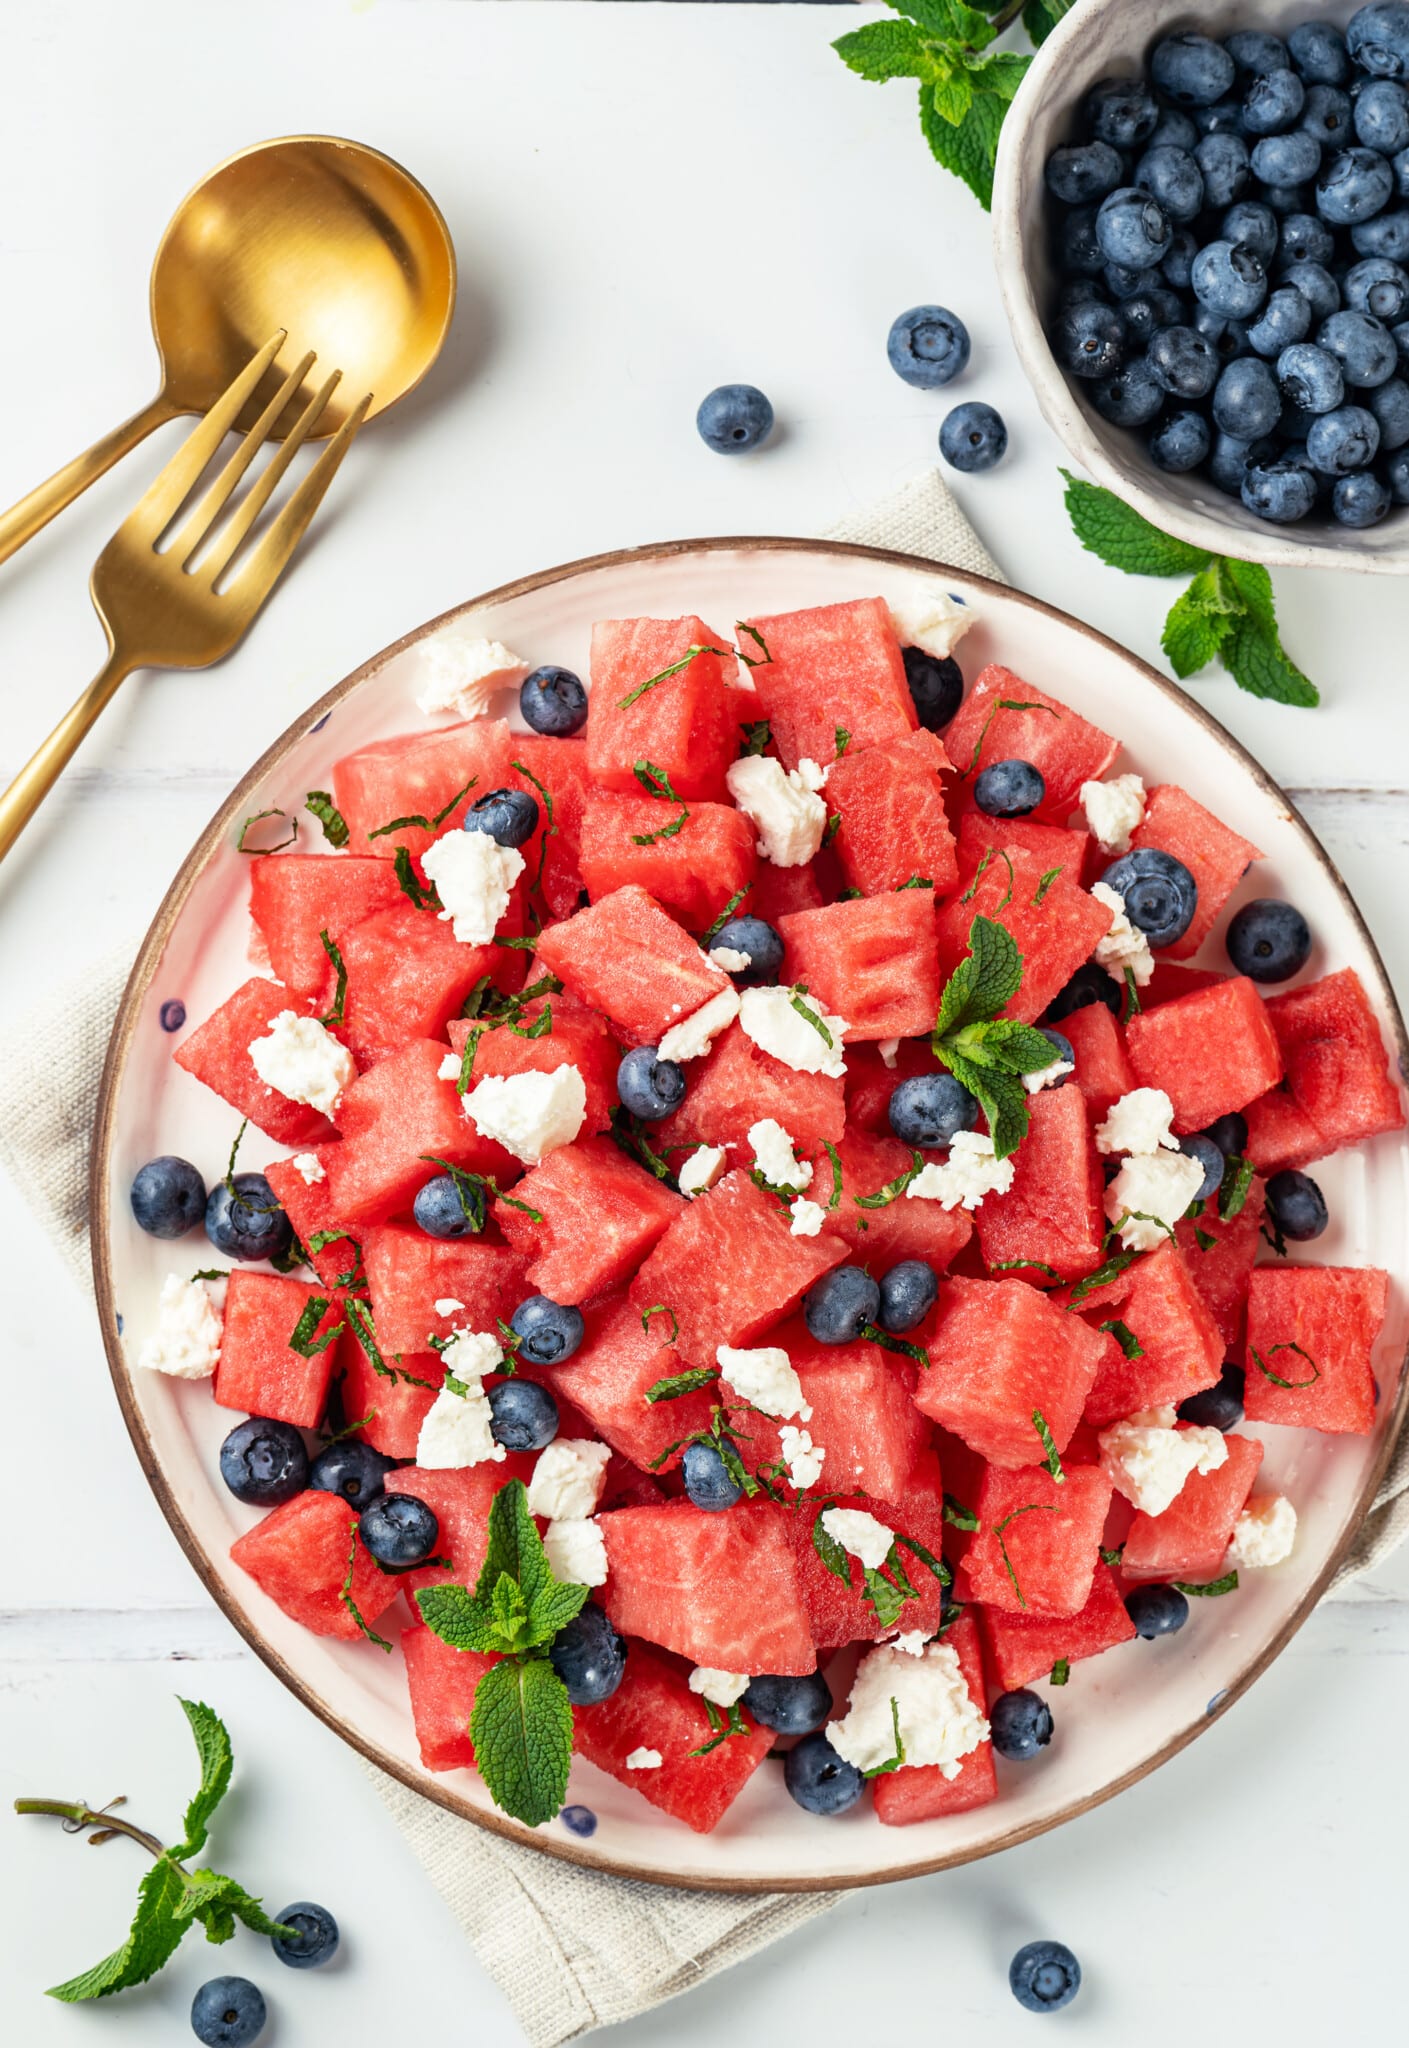 Quick Watermelon Summer Salad with Blueberries and Feta